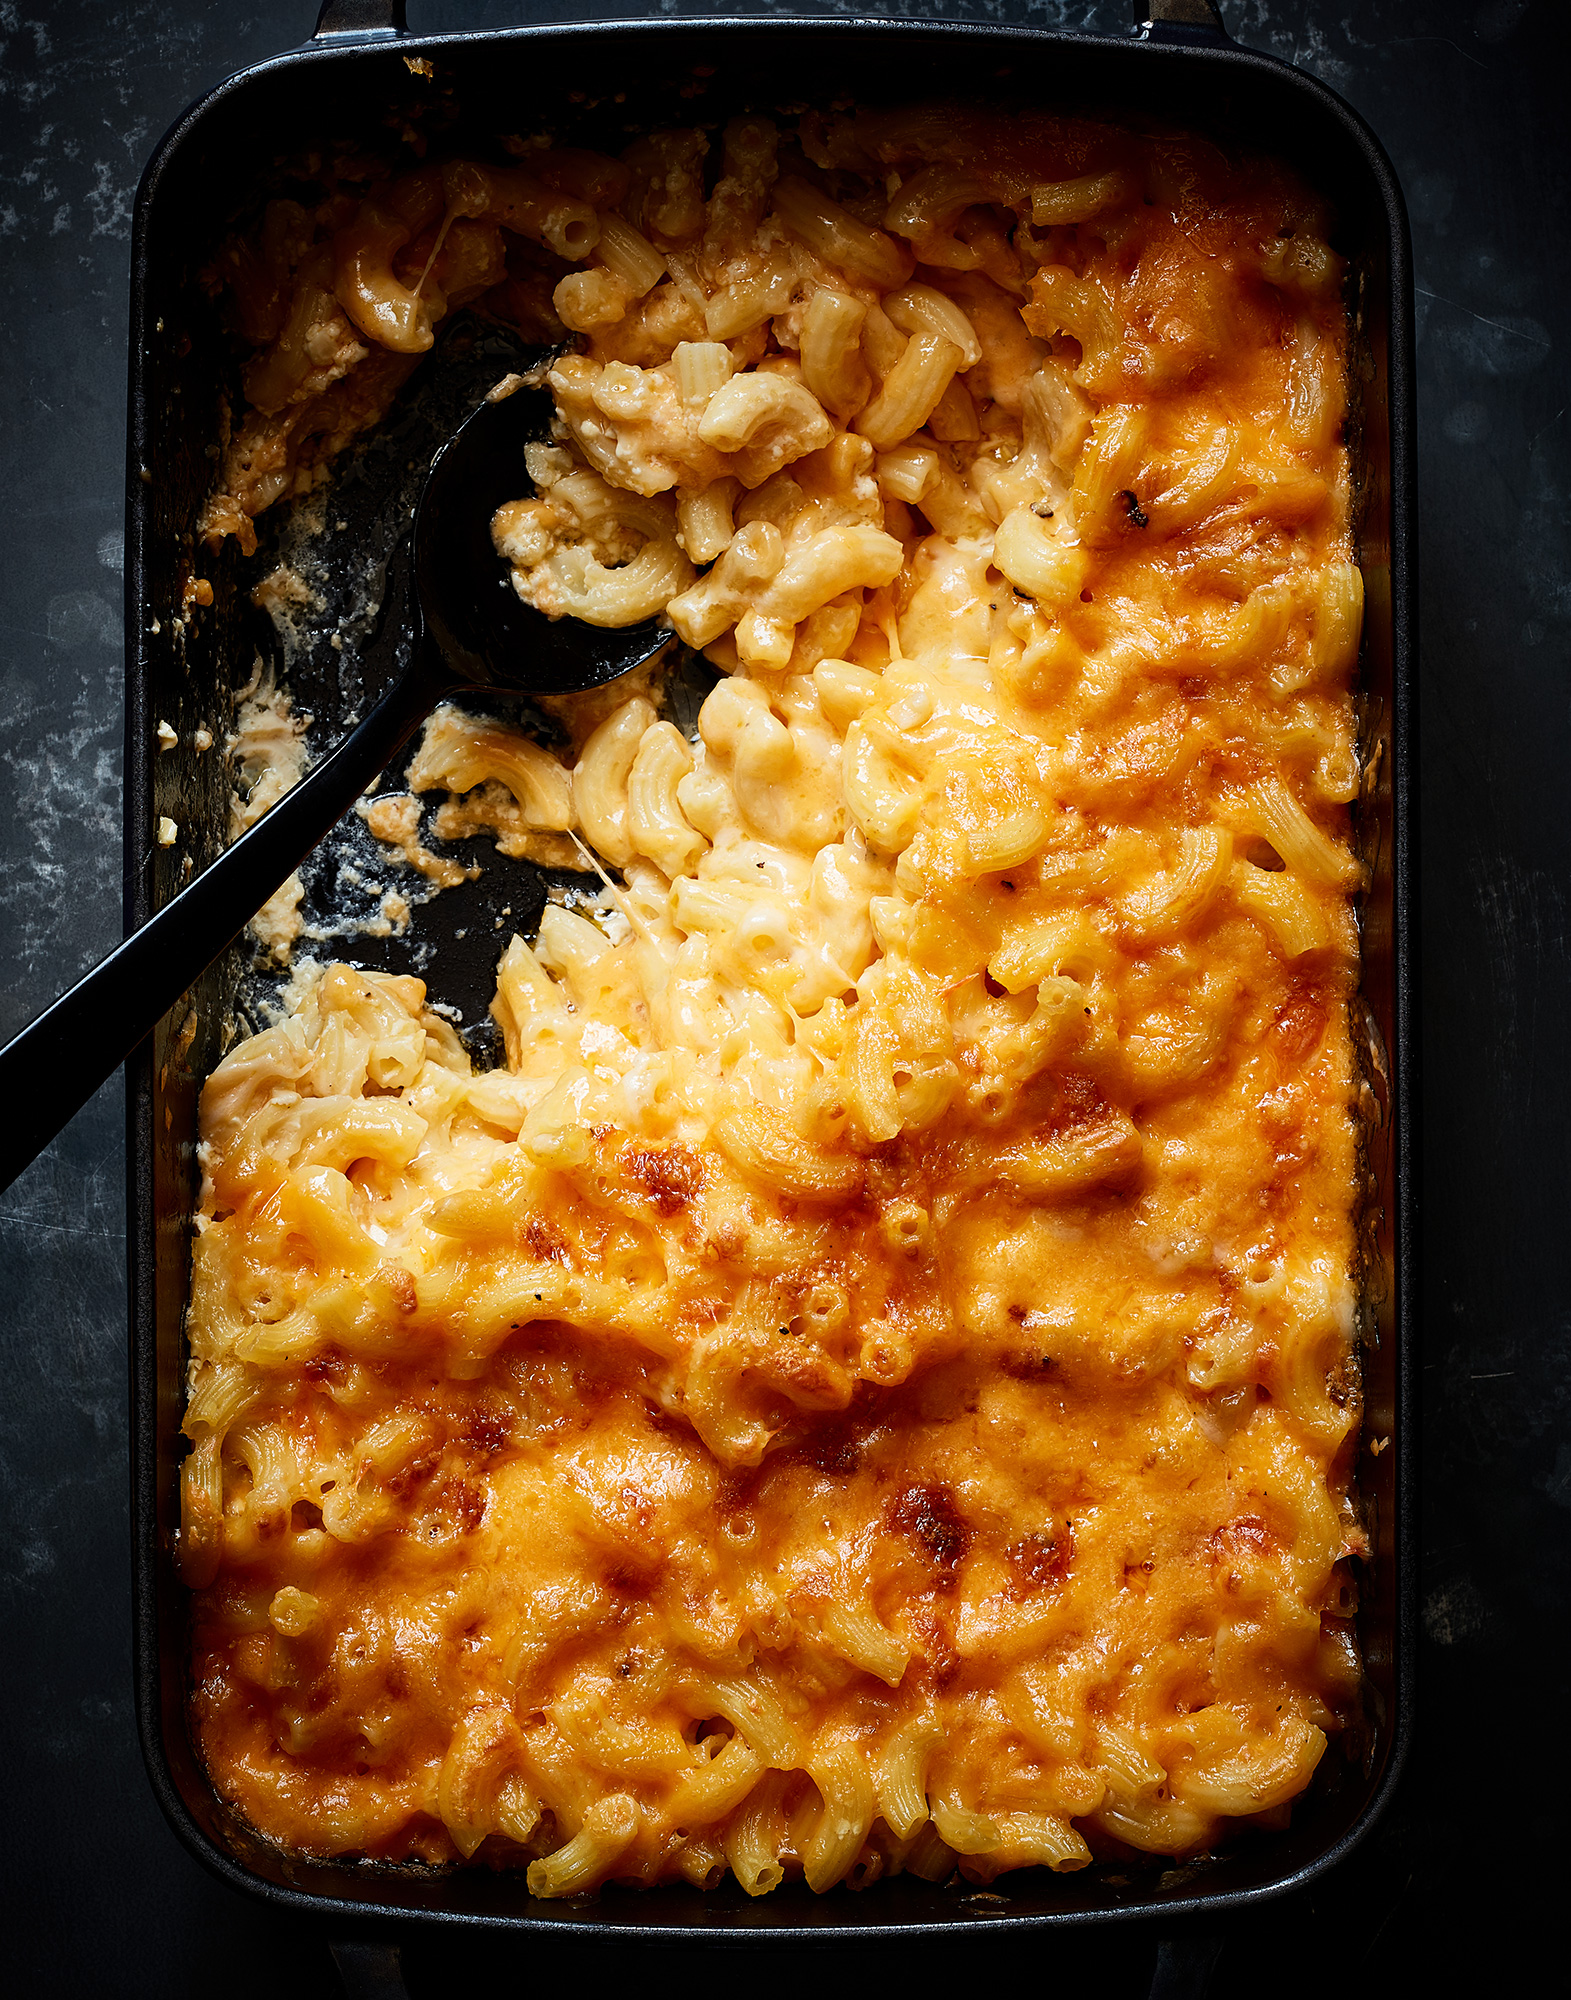 20190926_NYT_JM_S02_Millie_Peartree_MacNCheese_0043